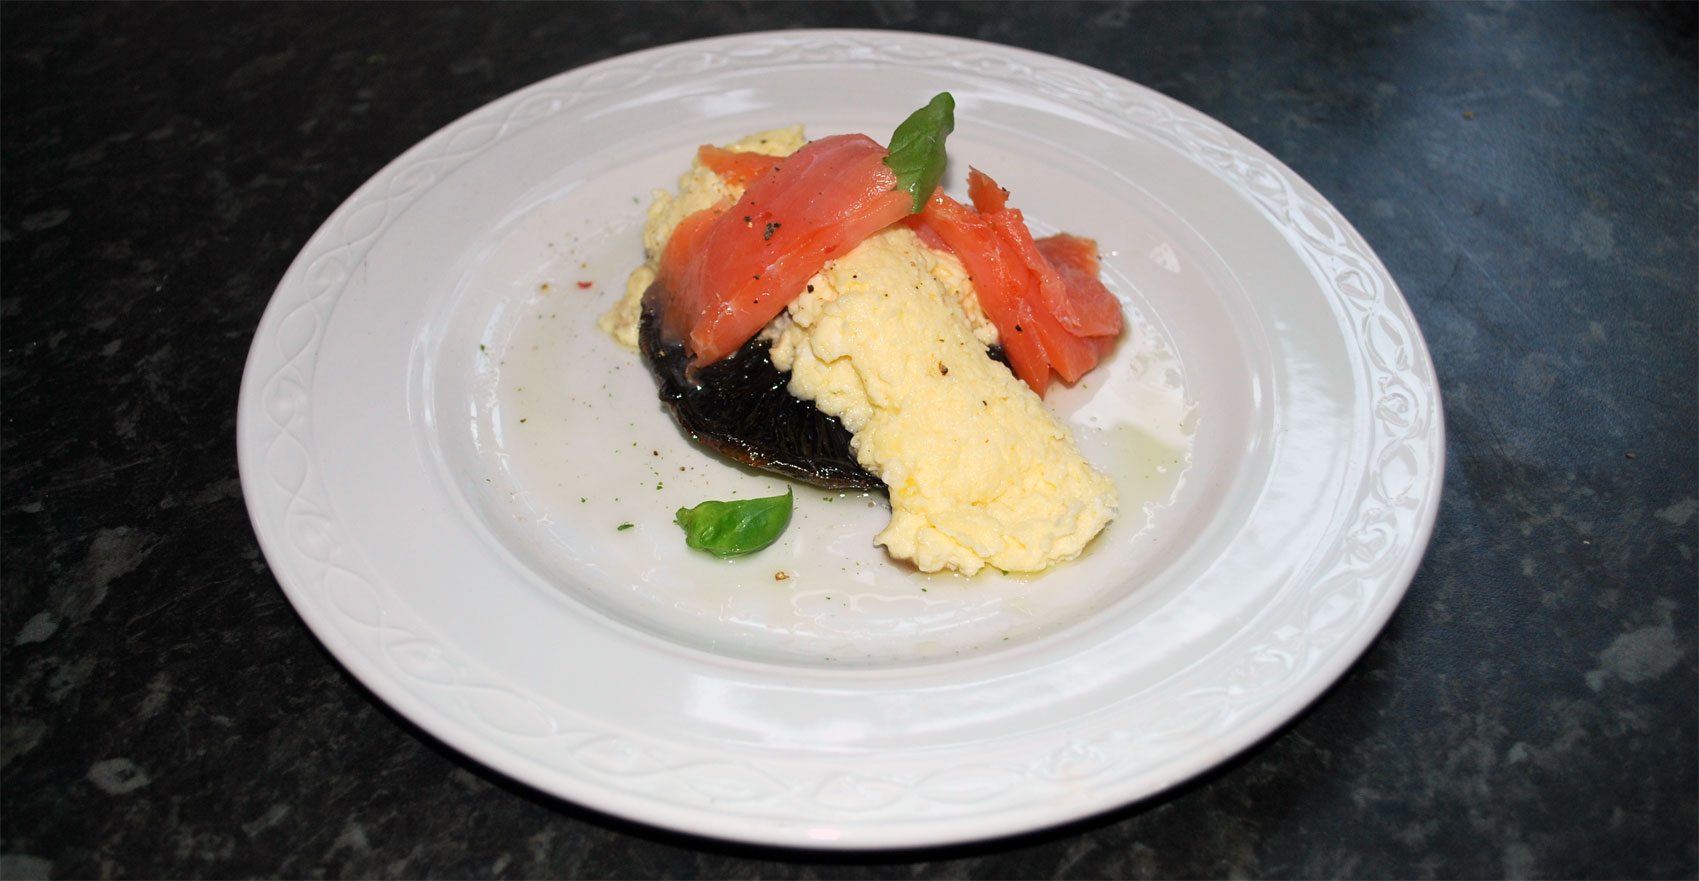 Grilled Field Mushroom with Smoked Salmon & Scrambled Egg